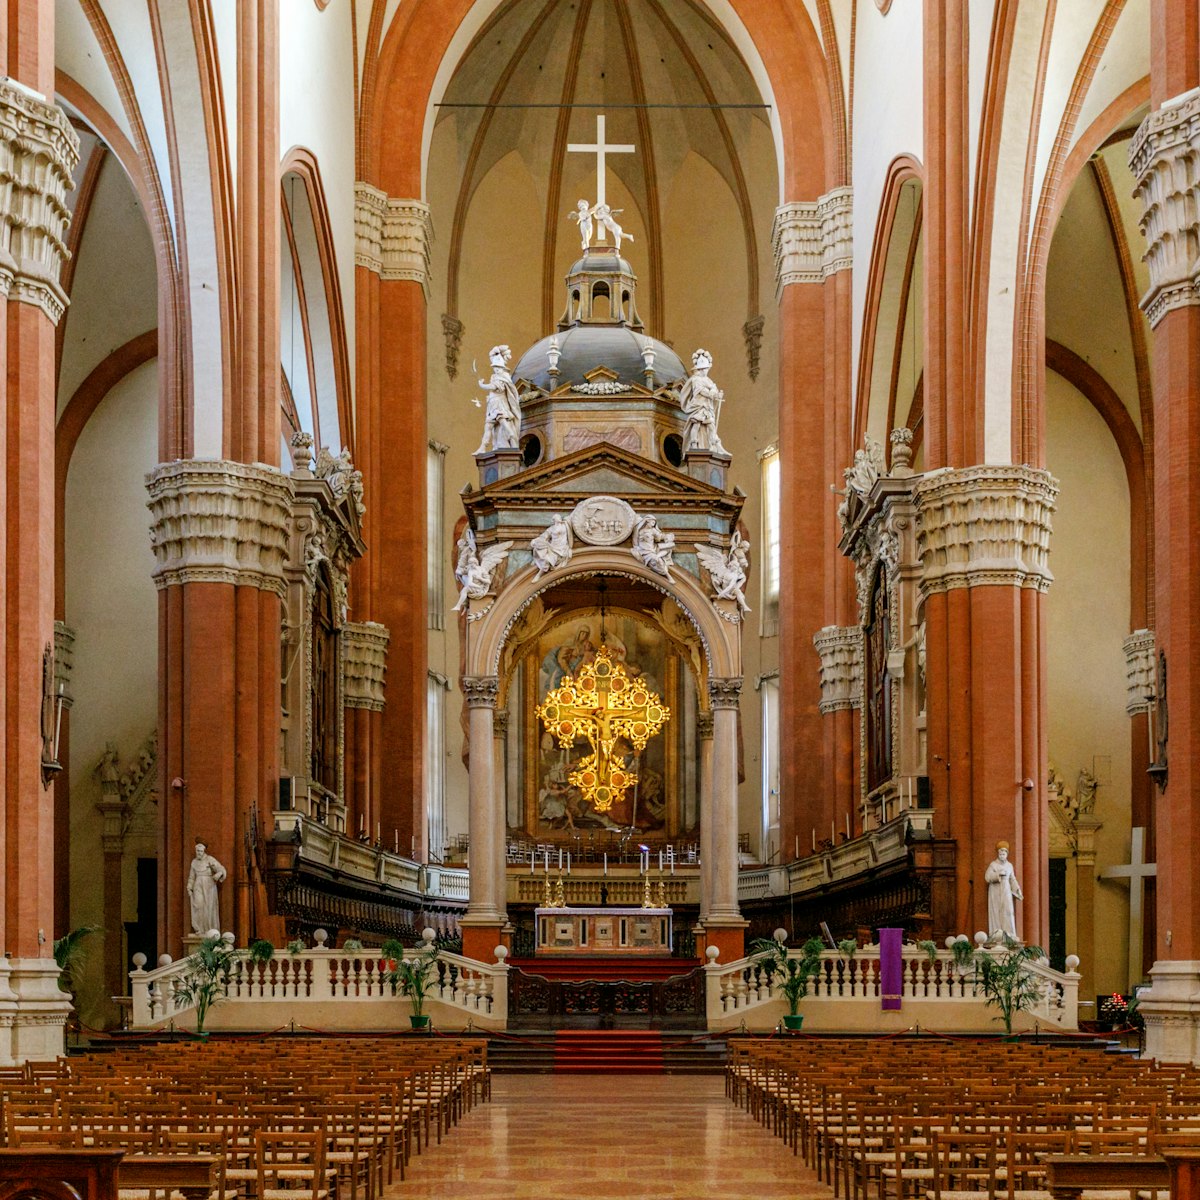 Wide-angle interior view of the Basilica of San Petronio, Piazza Maggiore, Bologna, Italy showing the marble columns and ornate gilded cross above the altar.
656090378
campanile, palazzo